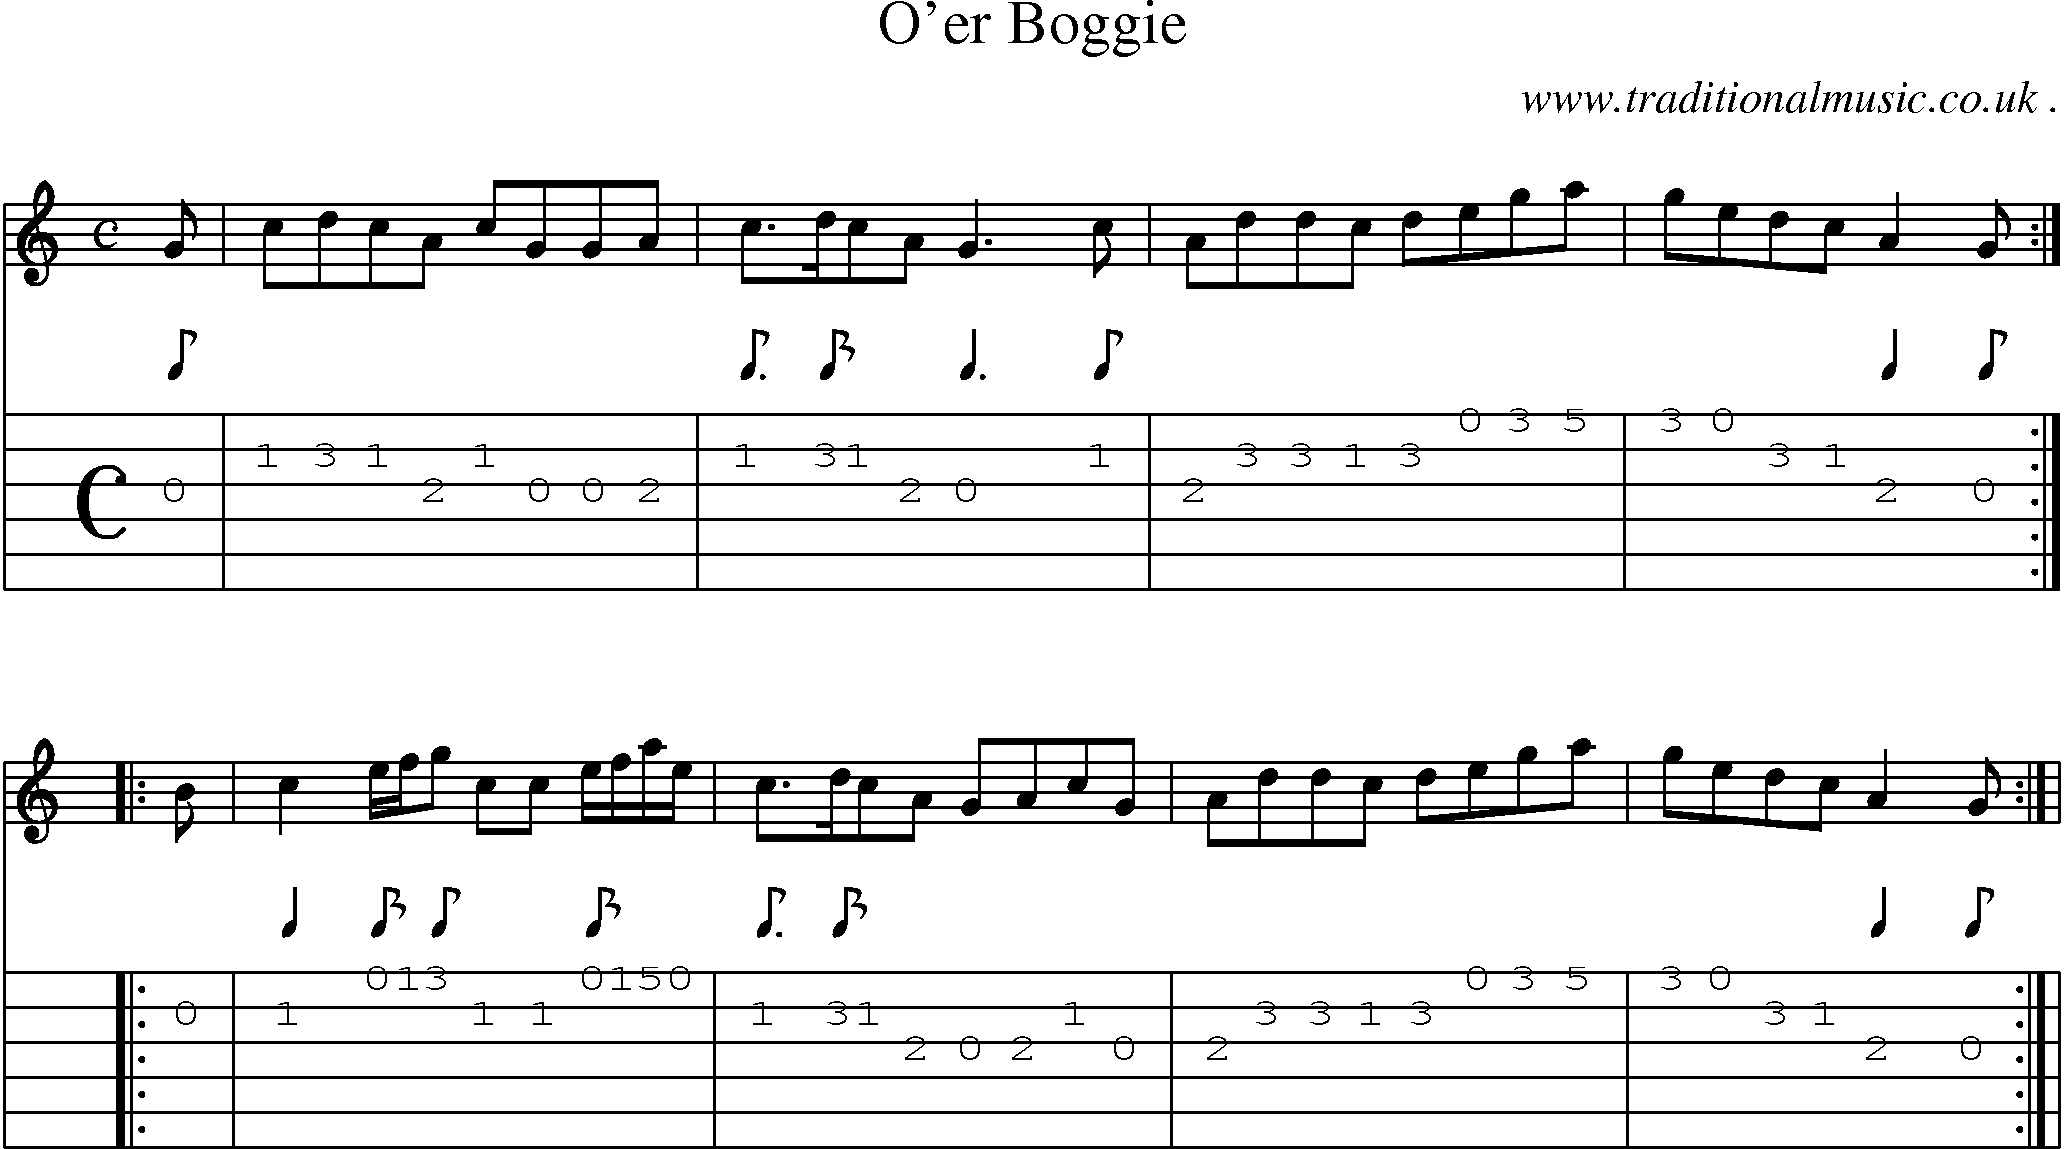 Sheet-Music and Guitar Tabs for Oer Boggie